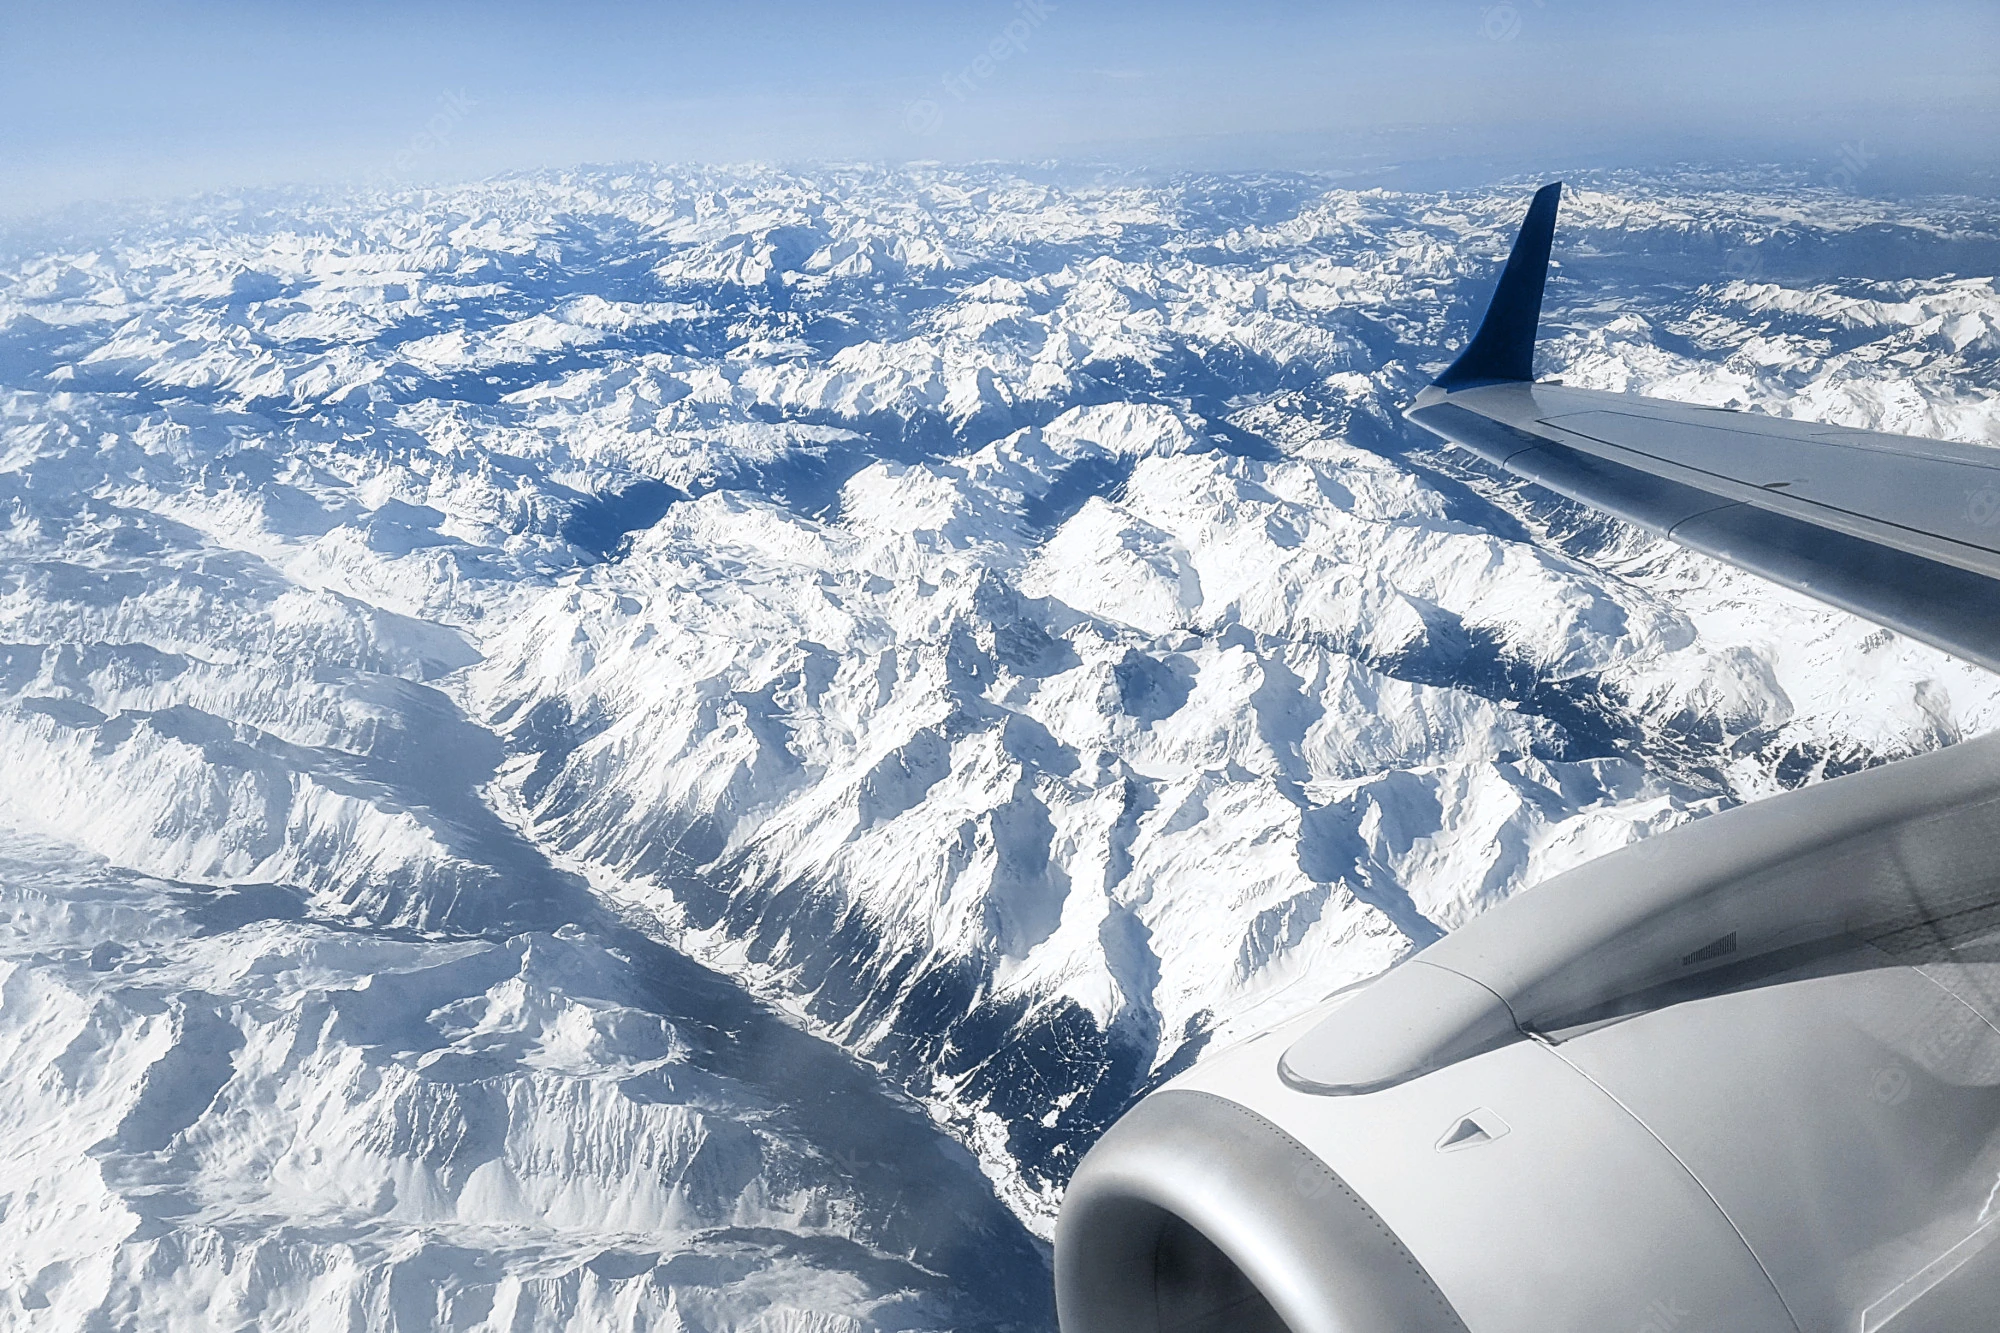 view-from-airplane-window-snow-capped-peaks-alpine-mountains-engine-aircraft_94065-298